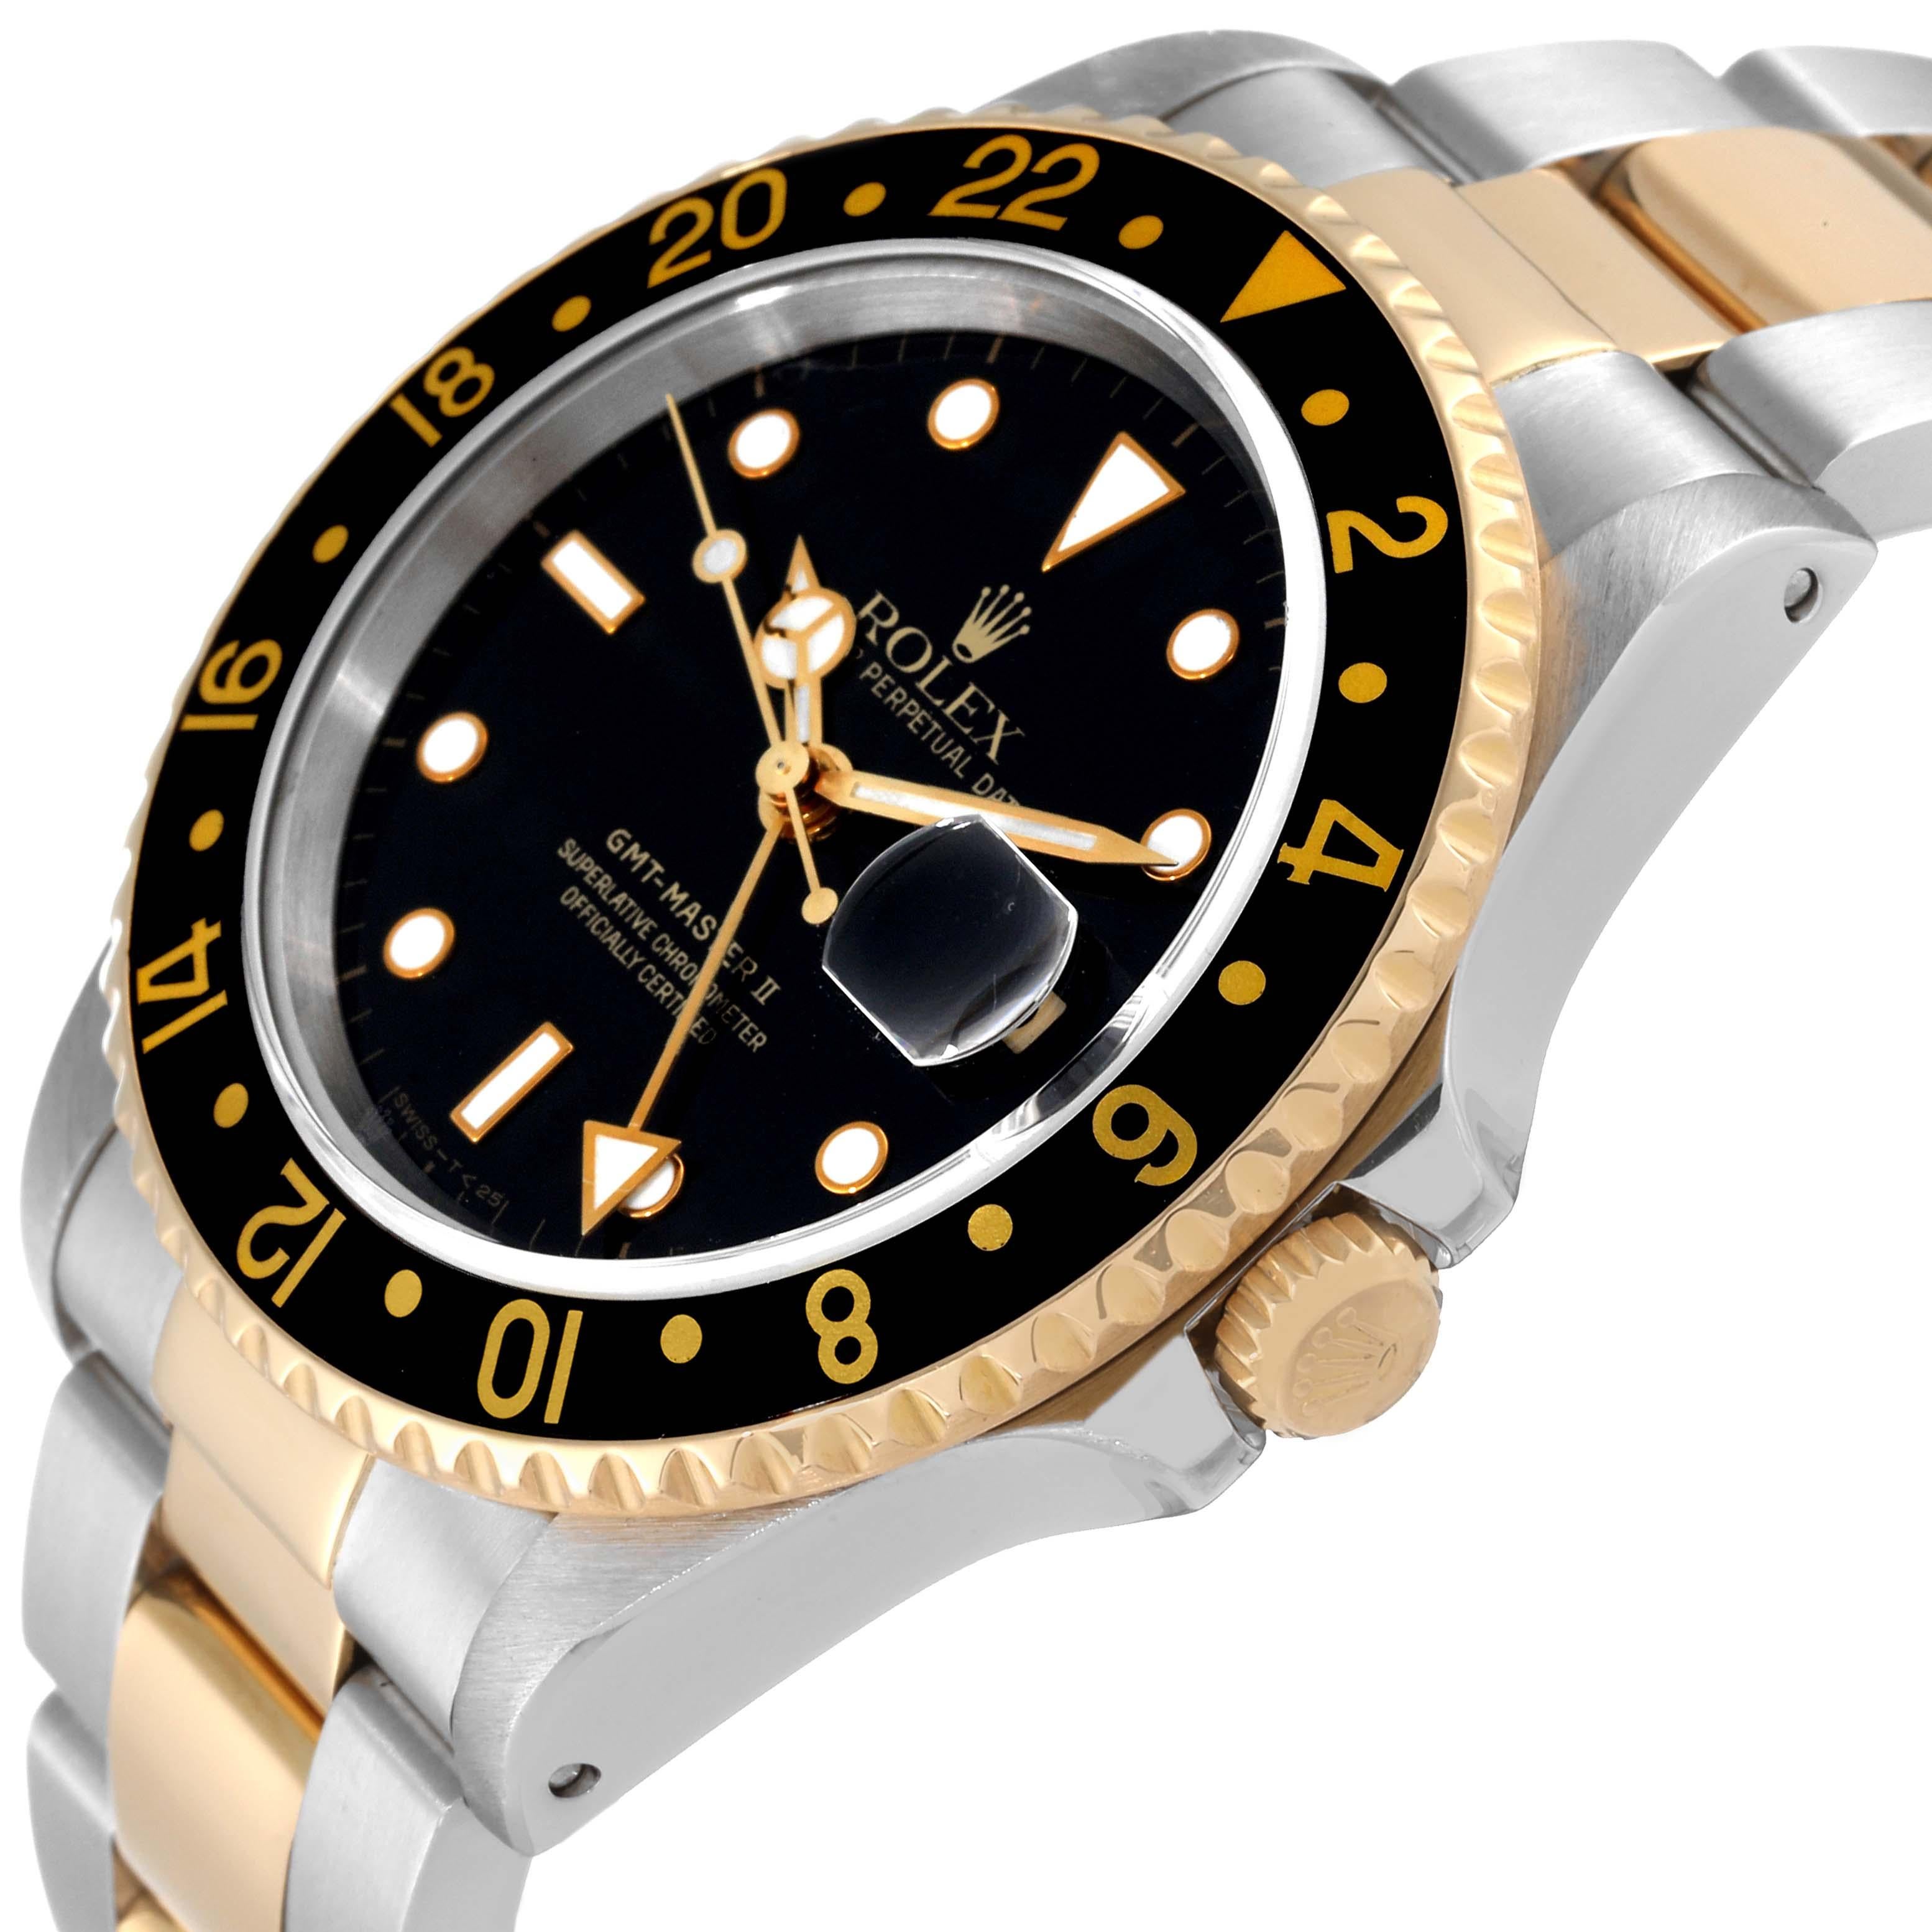 Rolex GMT Master II Yellow Gold Steel Oyster Bracelet Mens Watch 16713 For Sale 1